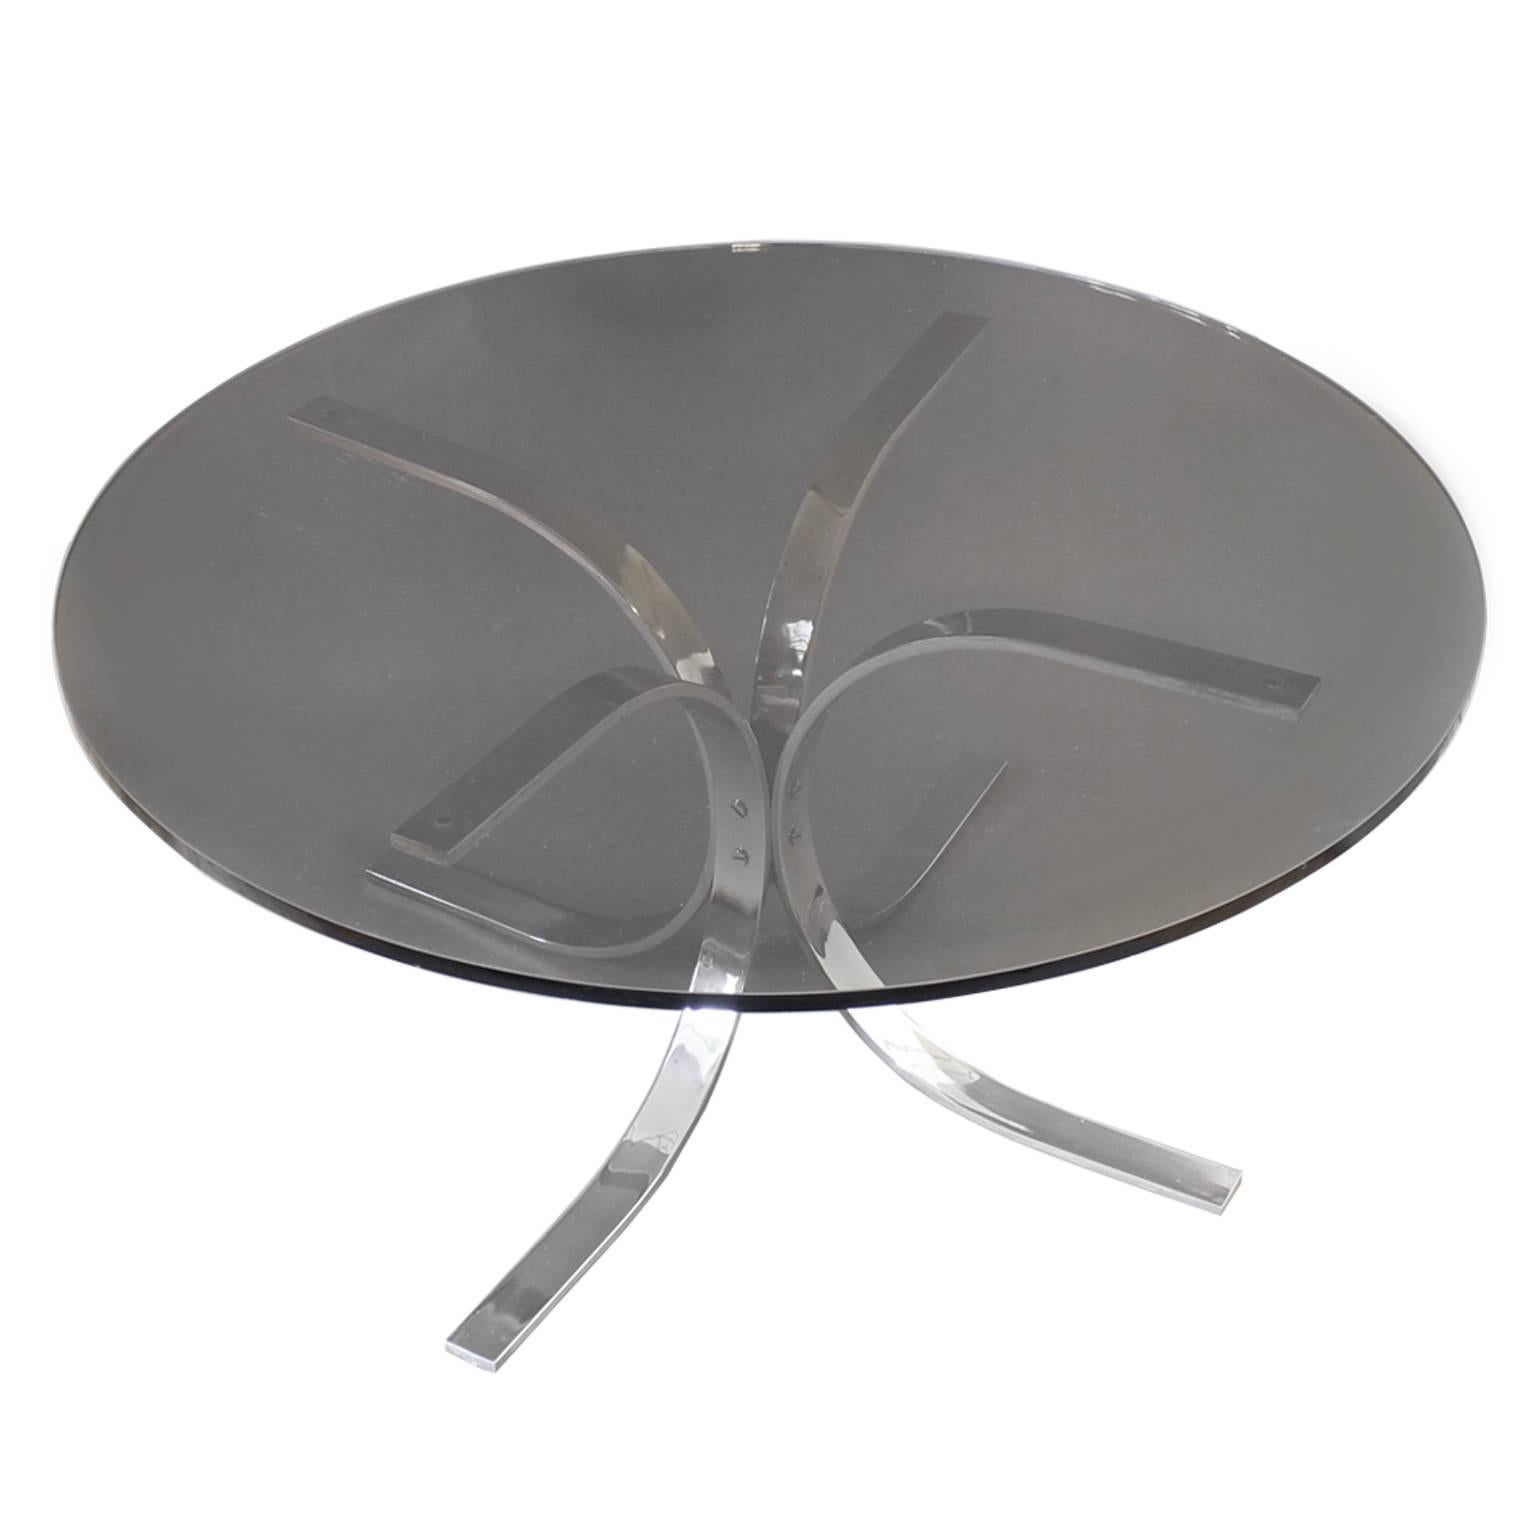 Circular smoked glass coffee table with chrome stand by Selig, 1970s. The smoked glass can be changed to your preferred glass.